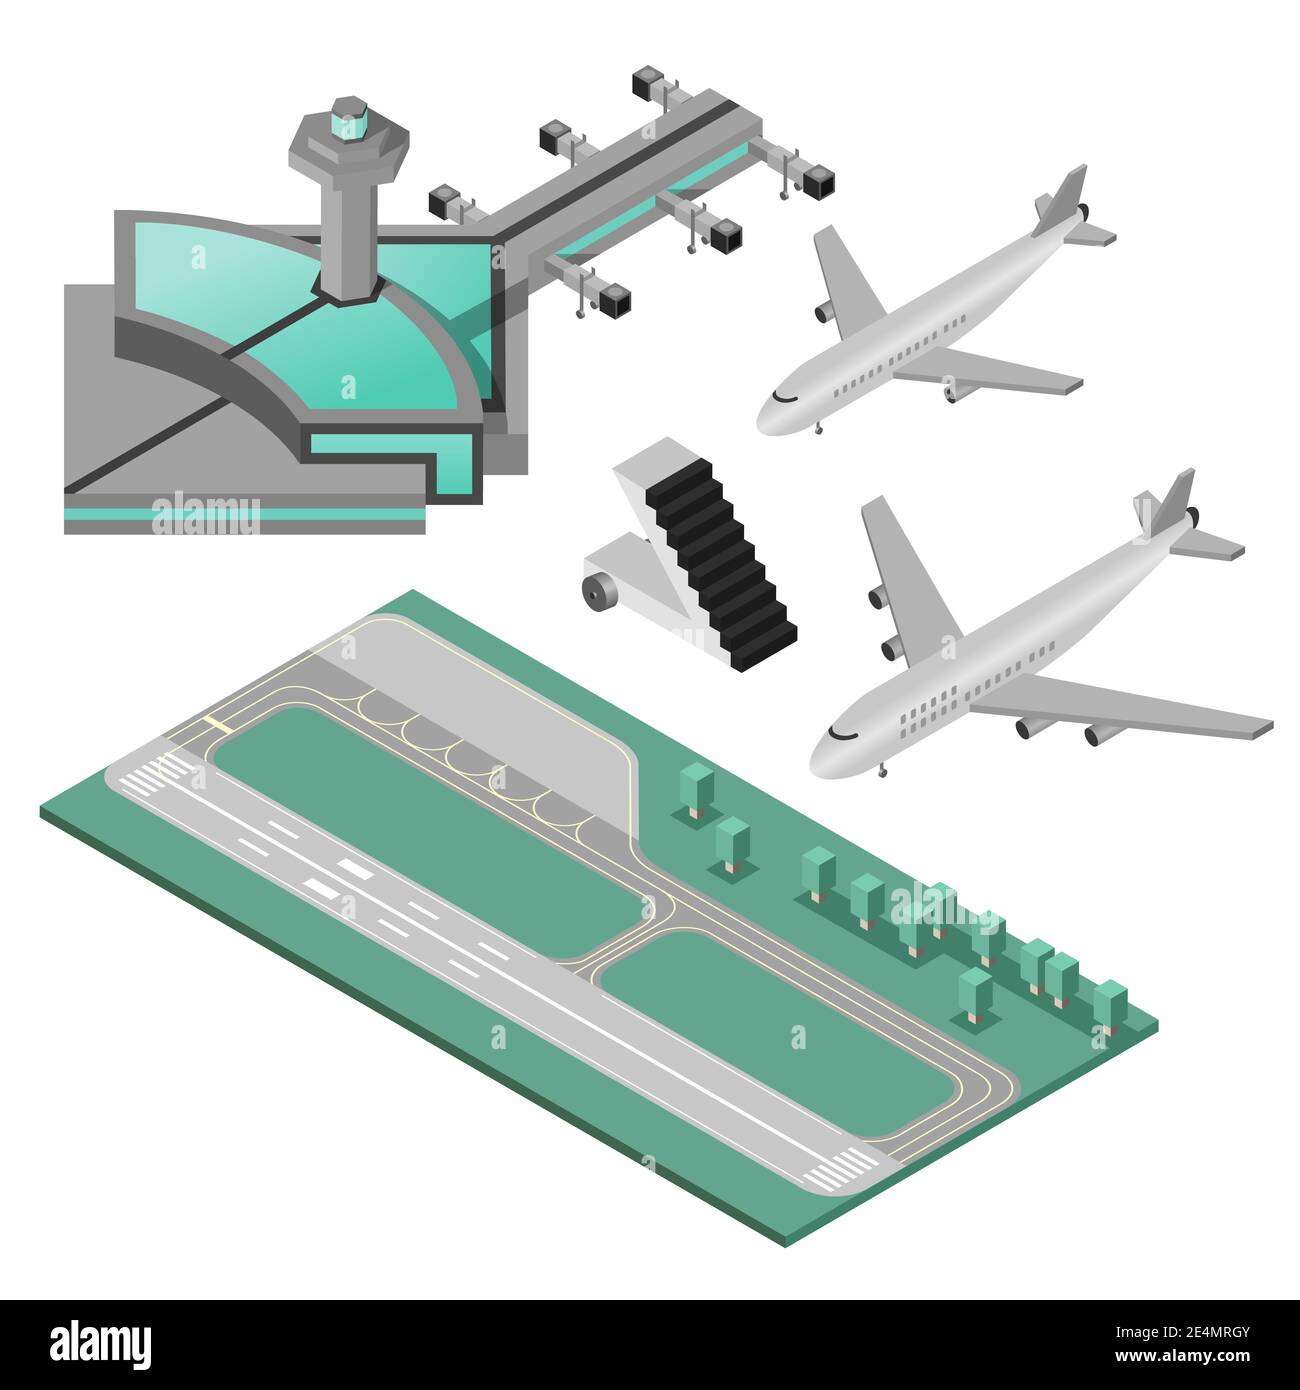 Airport stairway airplane and runway decorative icons 3d isometric set isolated vector illustration Stock Vector